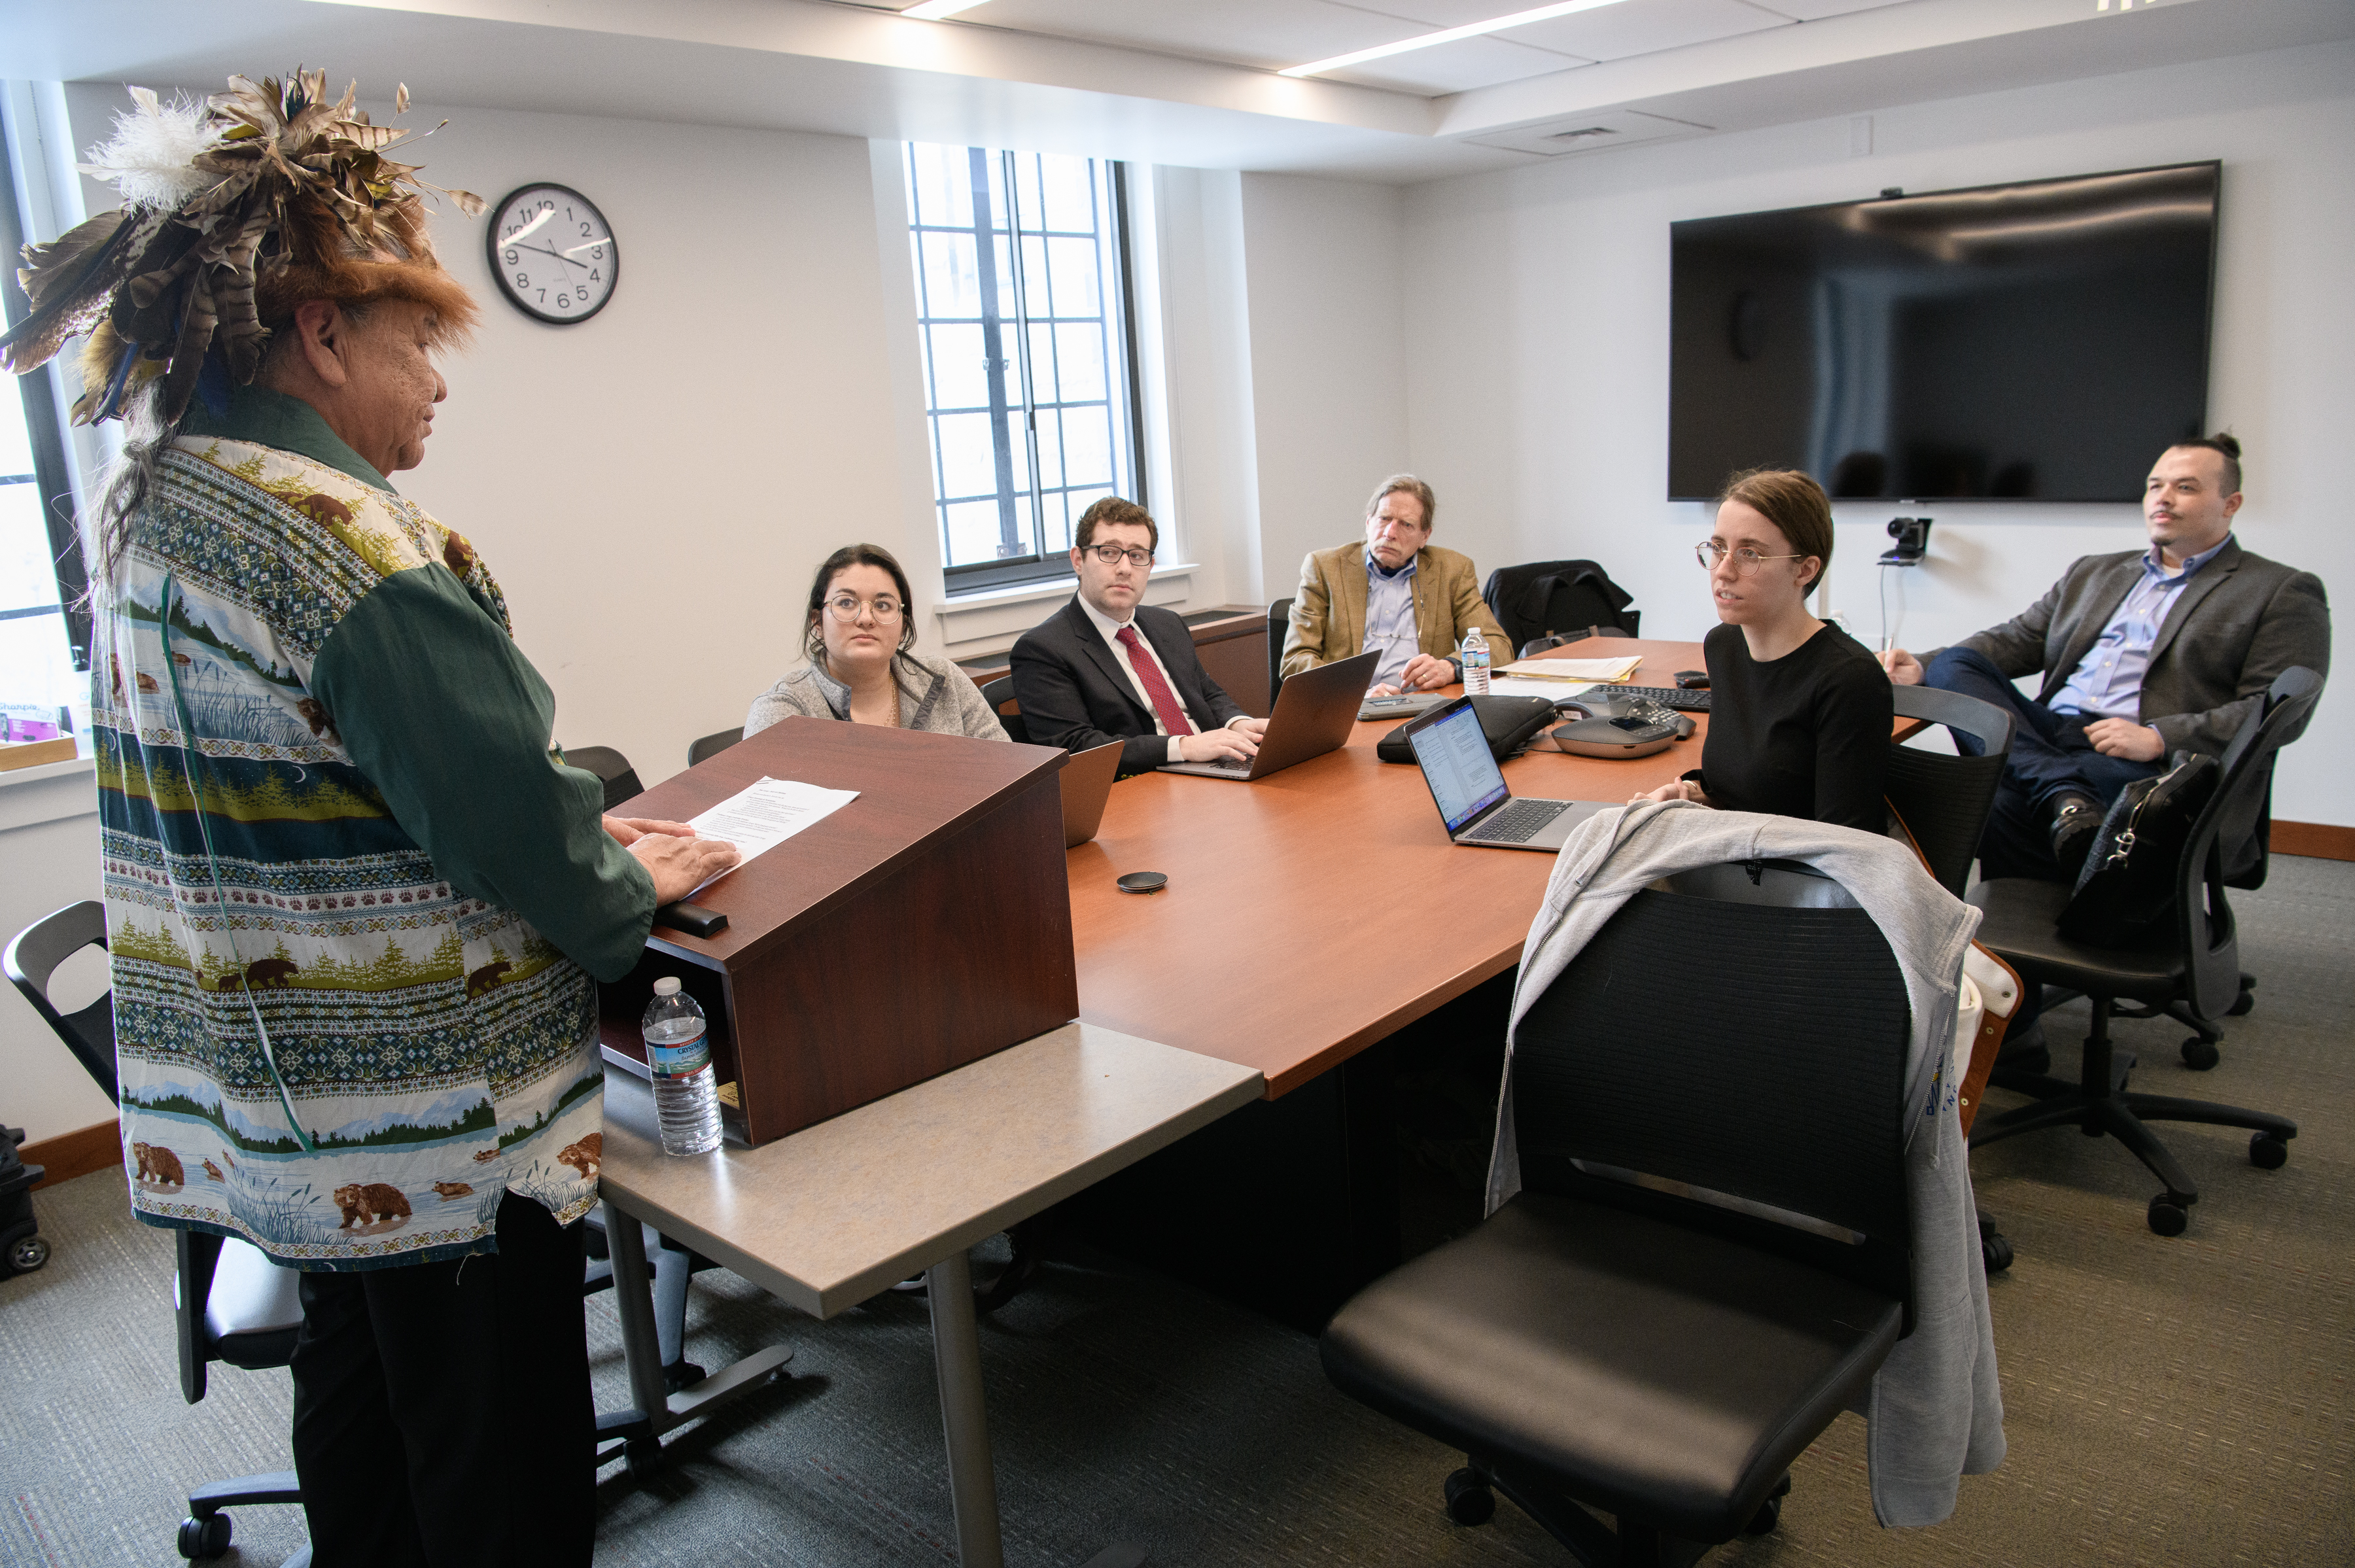 Sam George, a member of the Cayuga Nation and client of the Federal Indian Law Practicum, meets with the class. From left: George, Danica Murthy '24, ??, Adjunct Professor Joe Heath, Erin Elliott '24, and Adjunct Professor Michael Sliger.